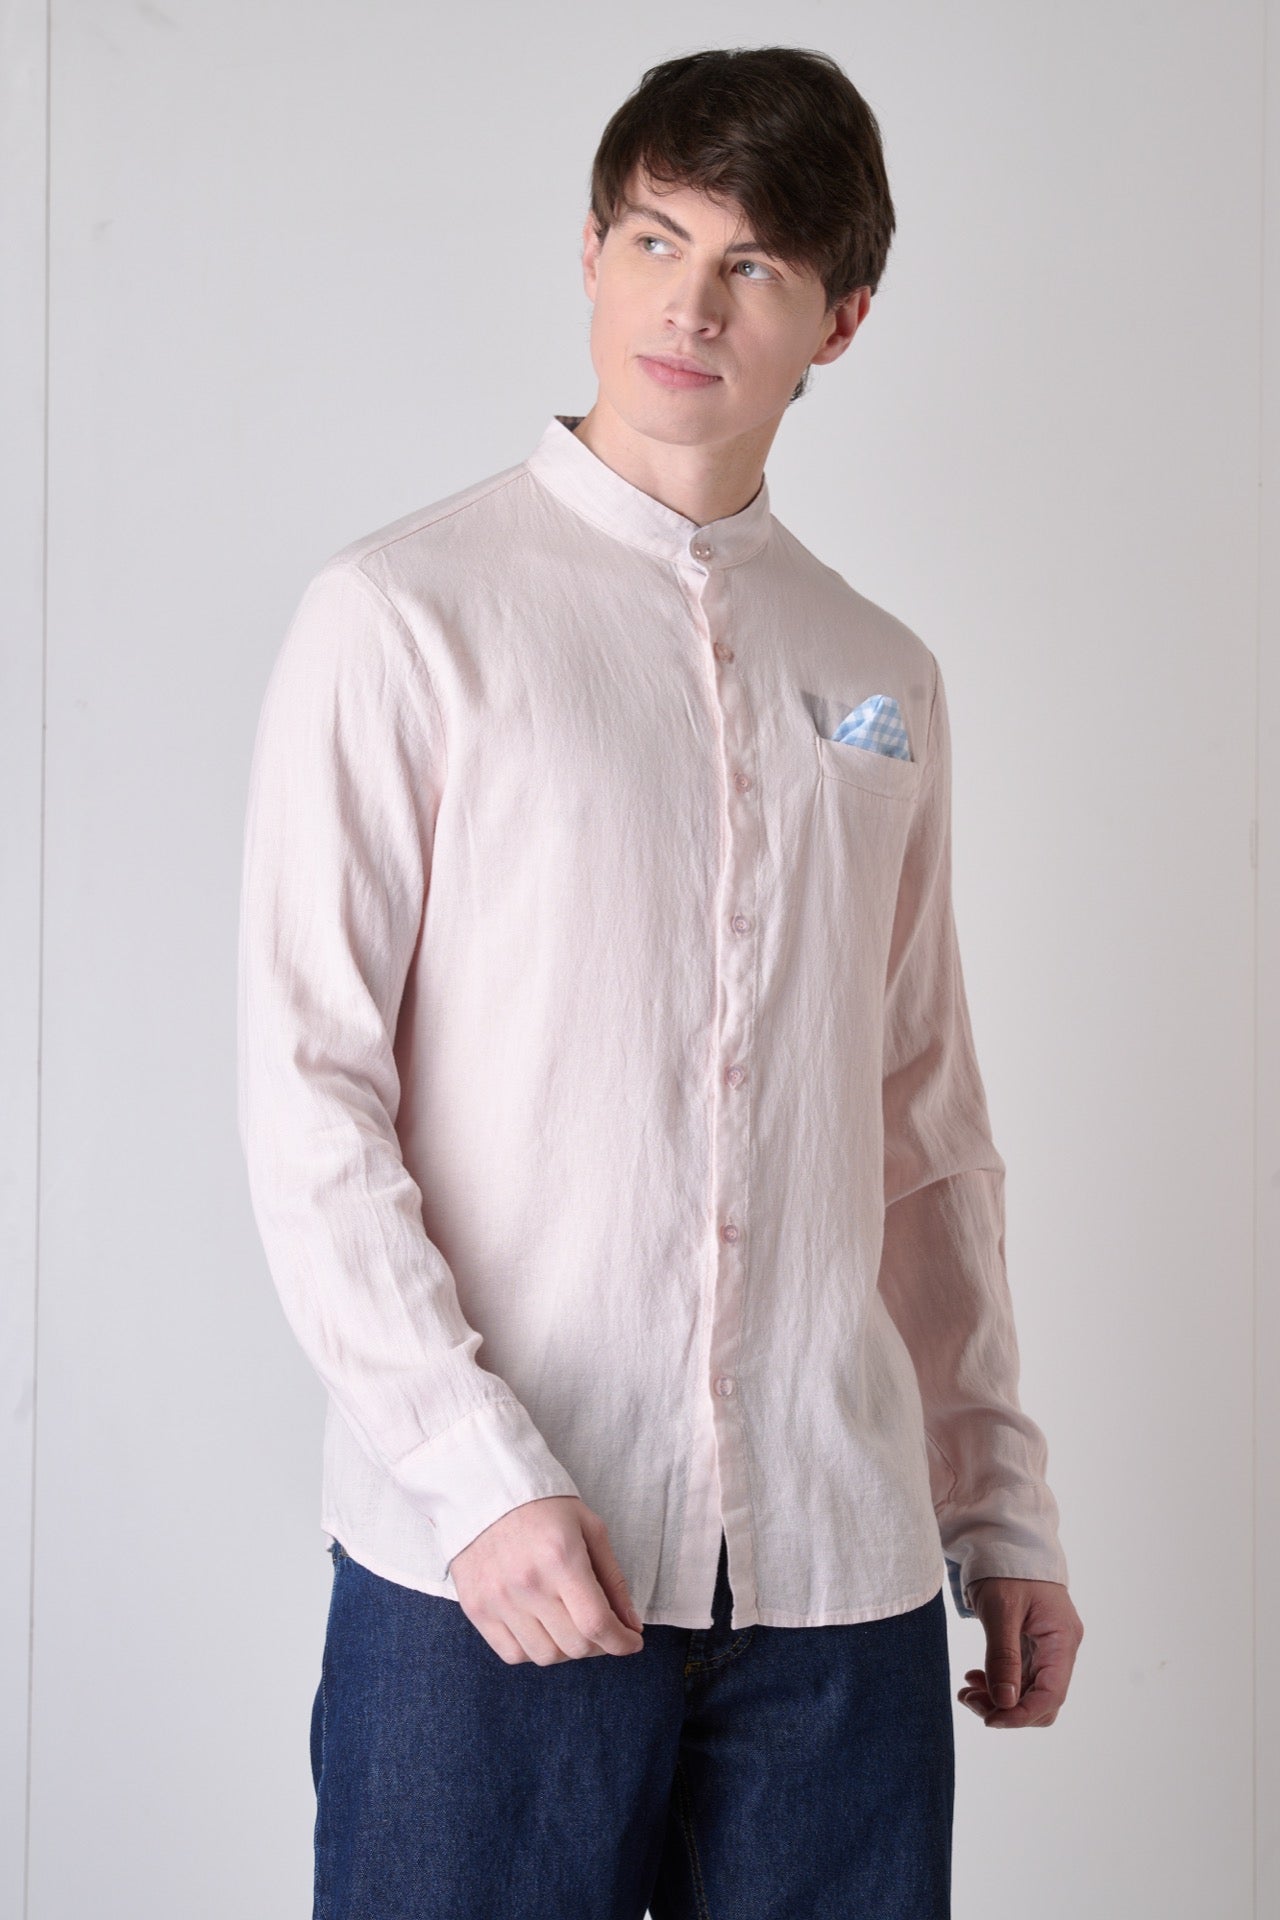 Korean Tailored Shirt in Powder Pink Linen with Pocket Square, Interior and Cuffs in V2 Fabric